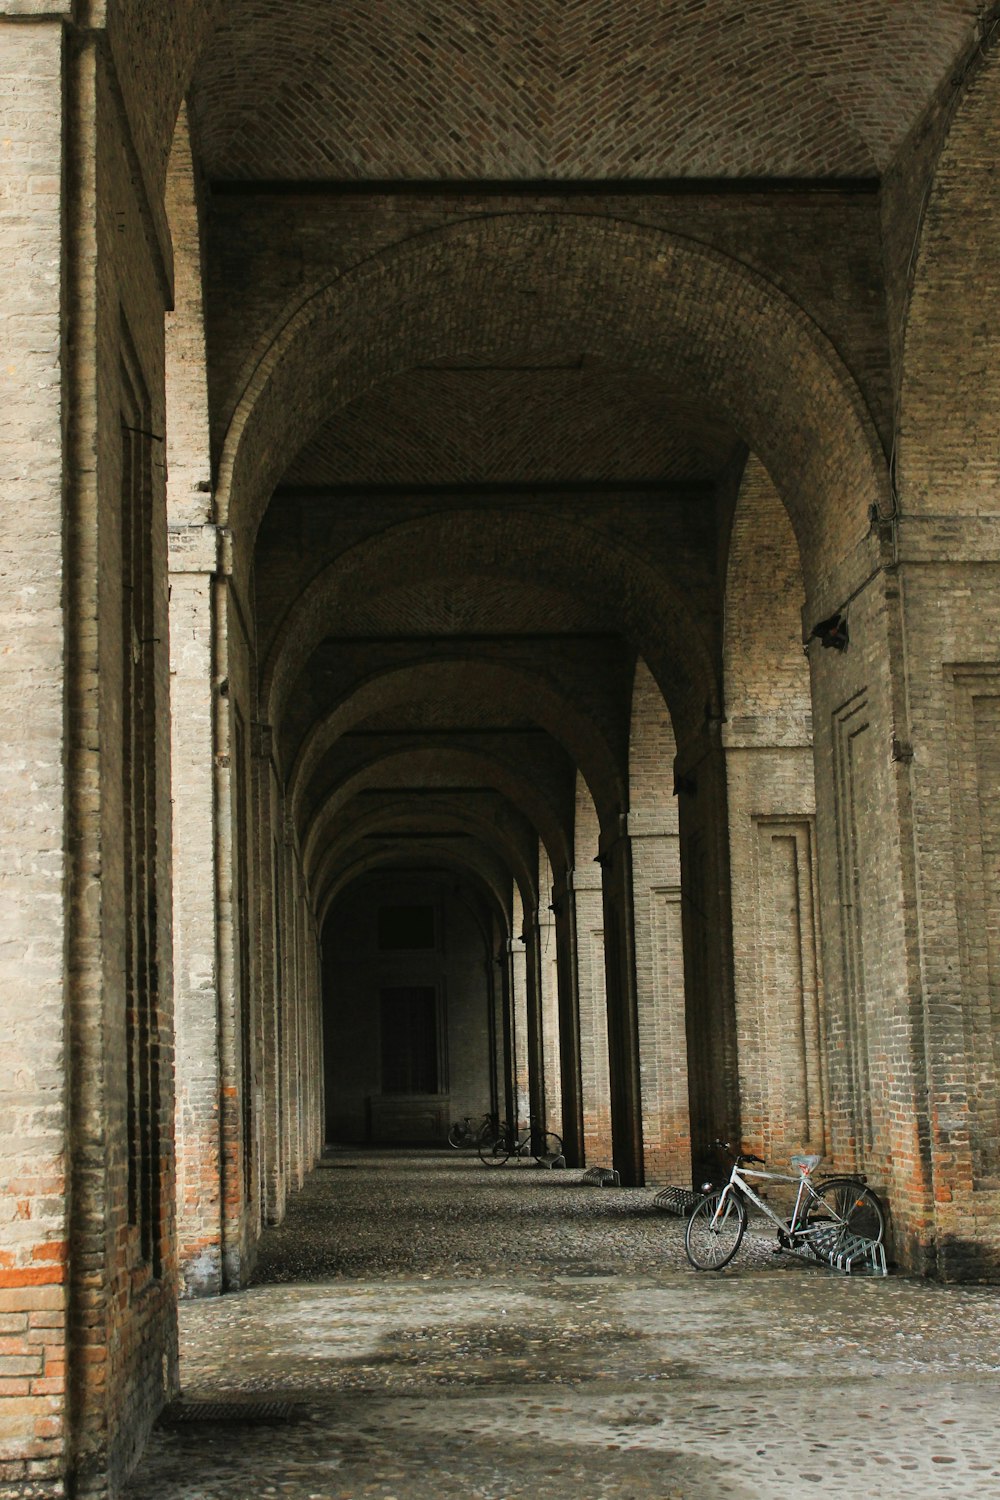 a bike is parked in a tunnel between two buildings